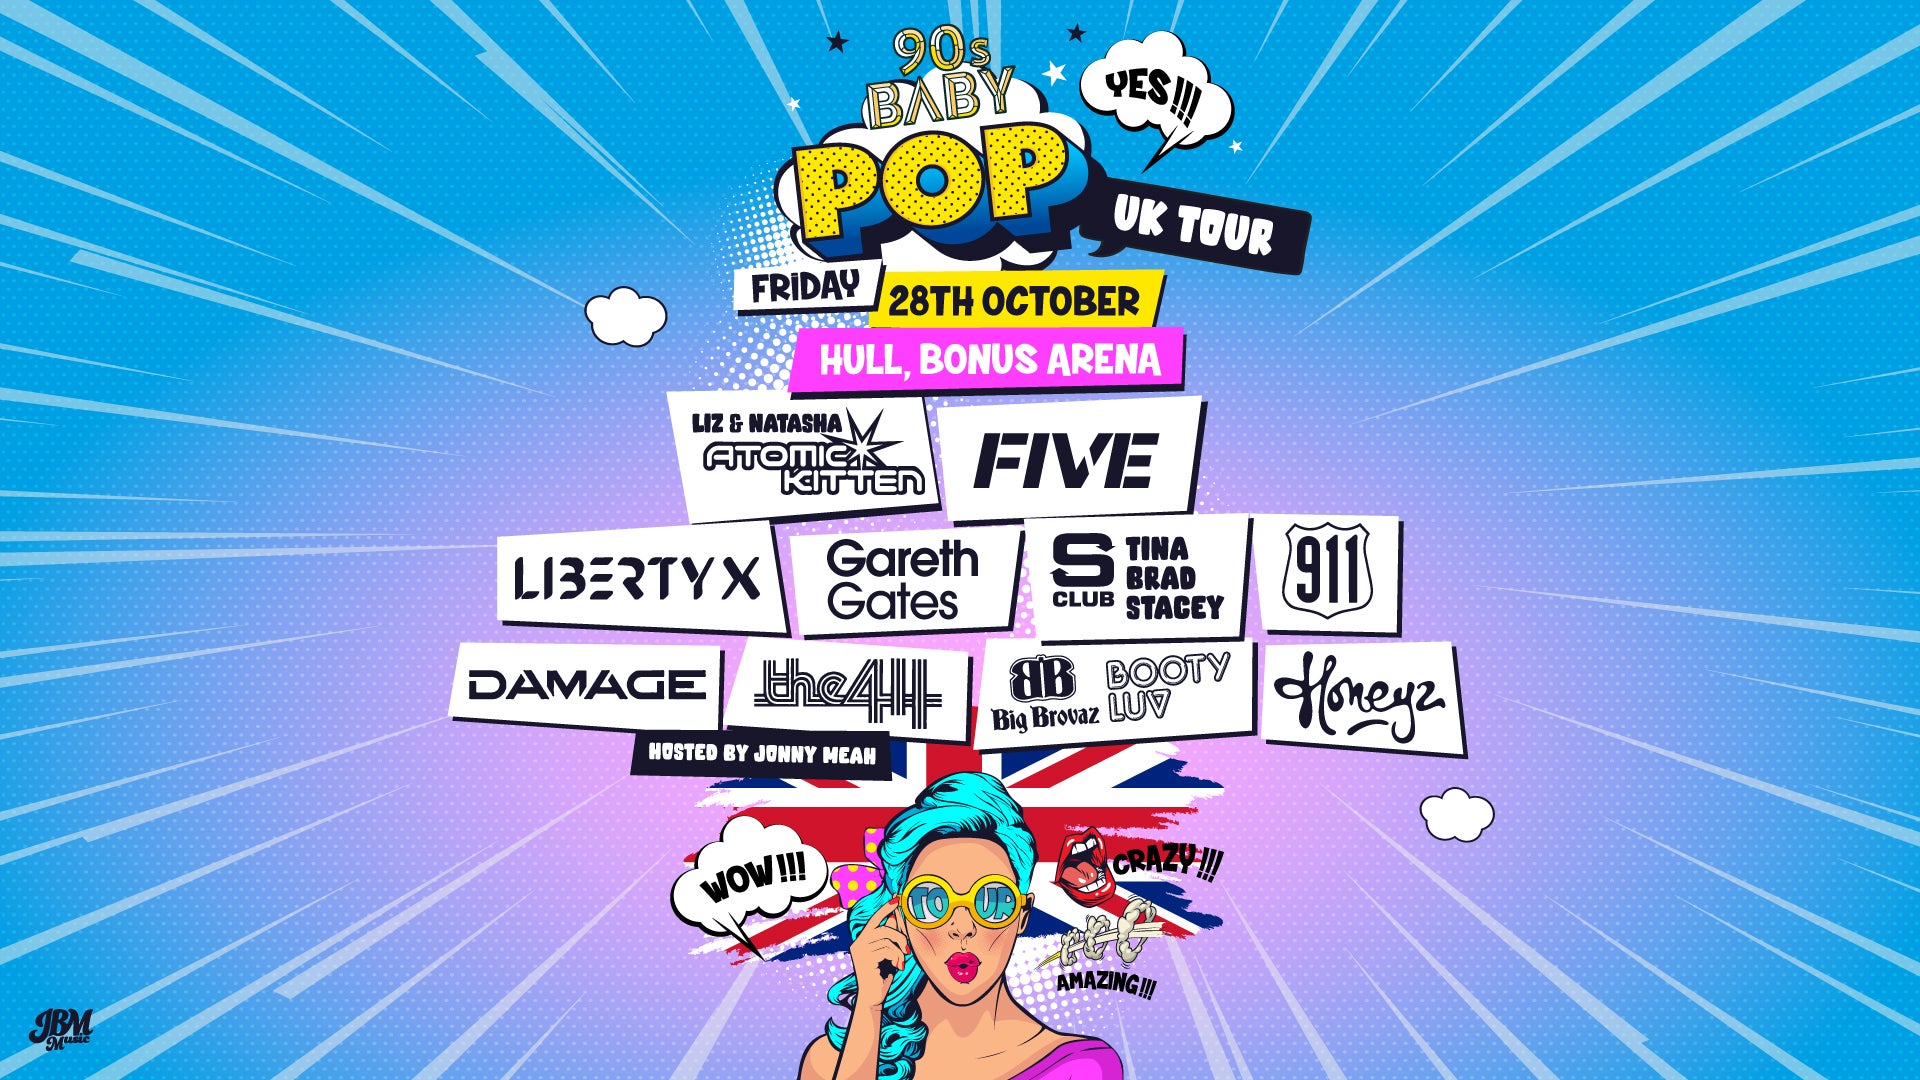 90s Baby POP UK Tour Event Title Pic